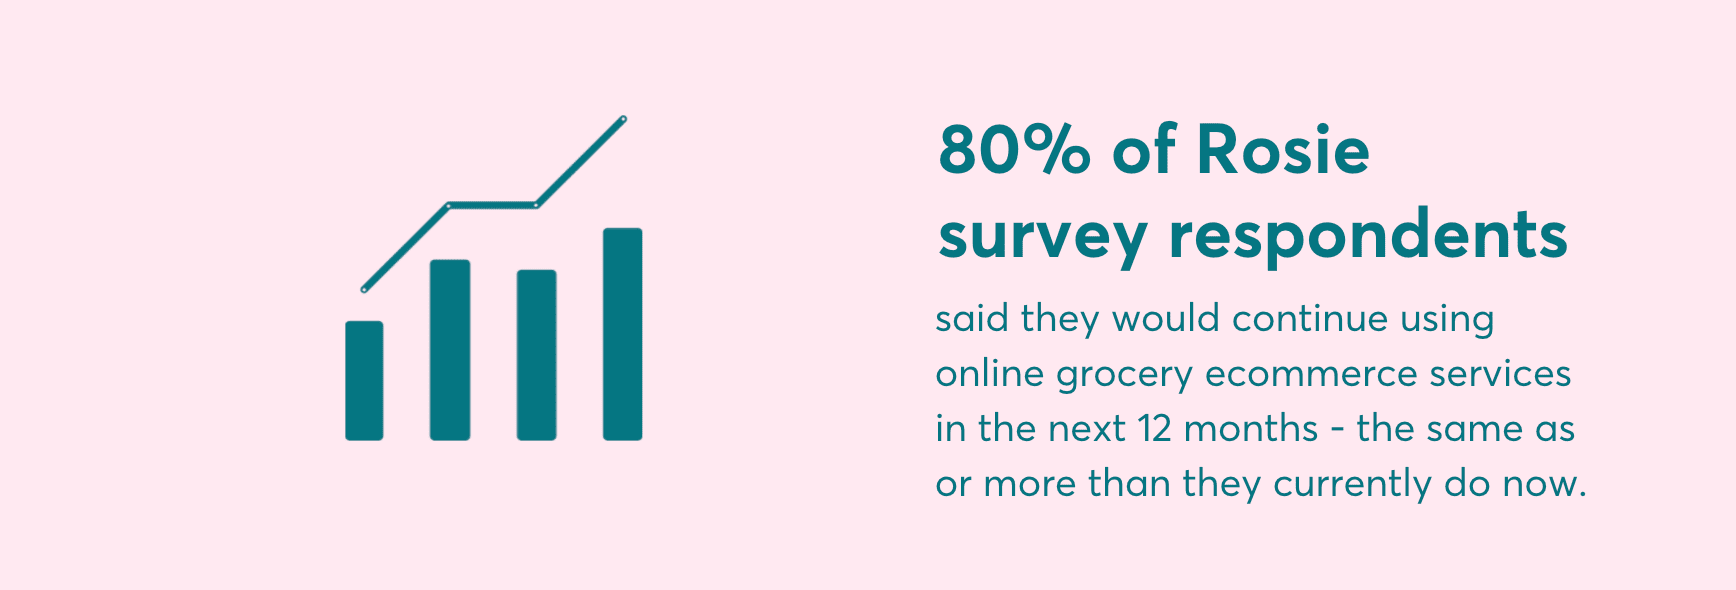 Image of a bar graph with the text 80% of Rosie survey respondents said they would continue using online grocery ecommerce services in the next 12 months - the same as or more than they currently do now.